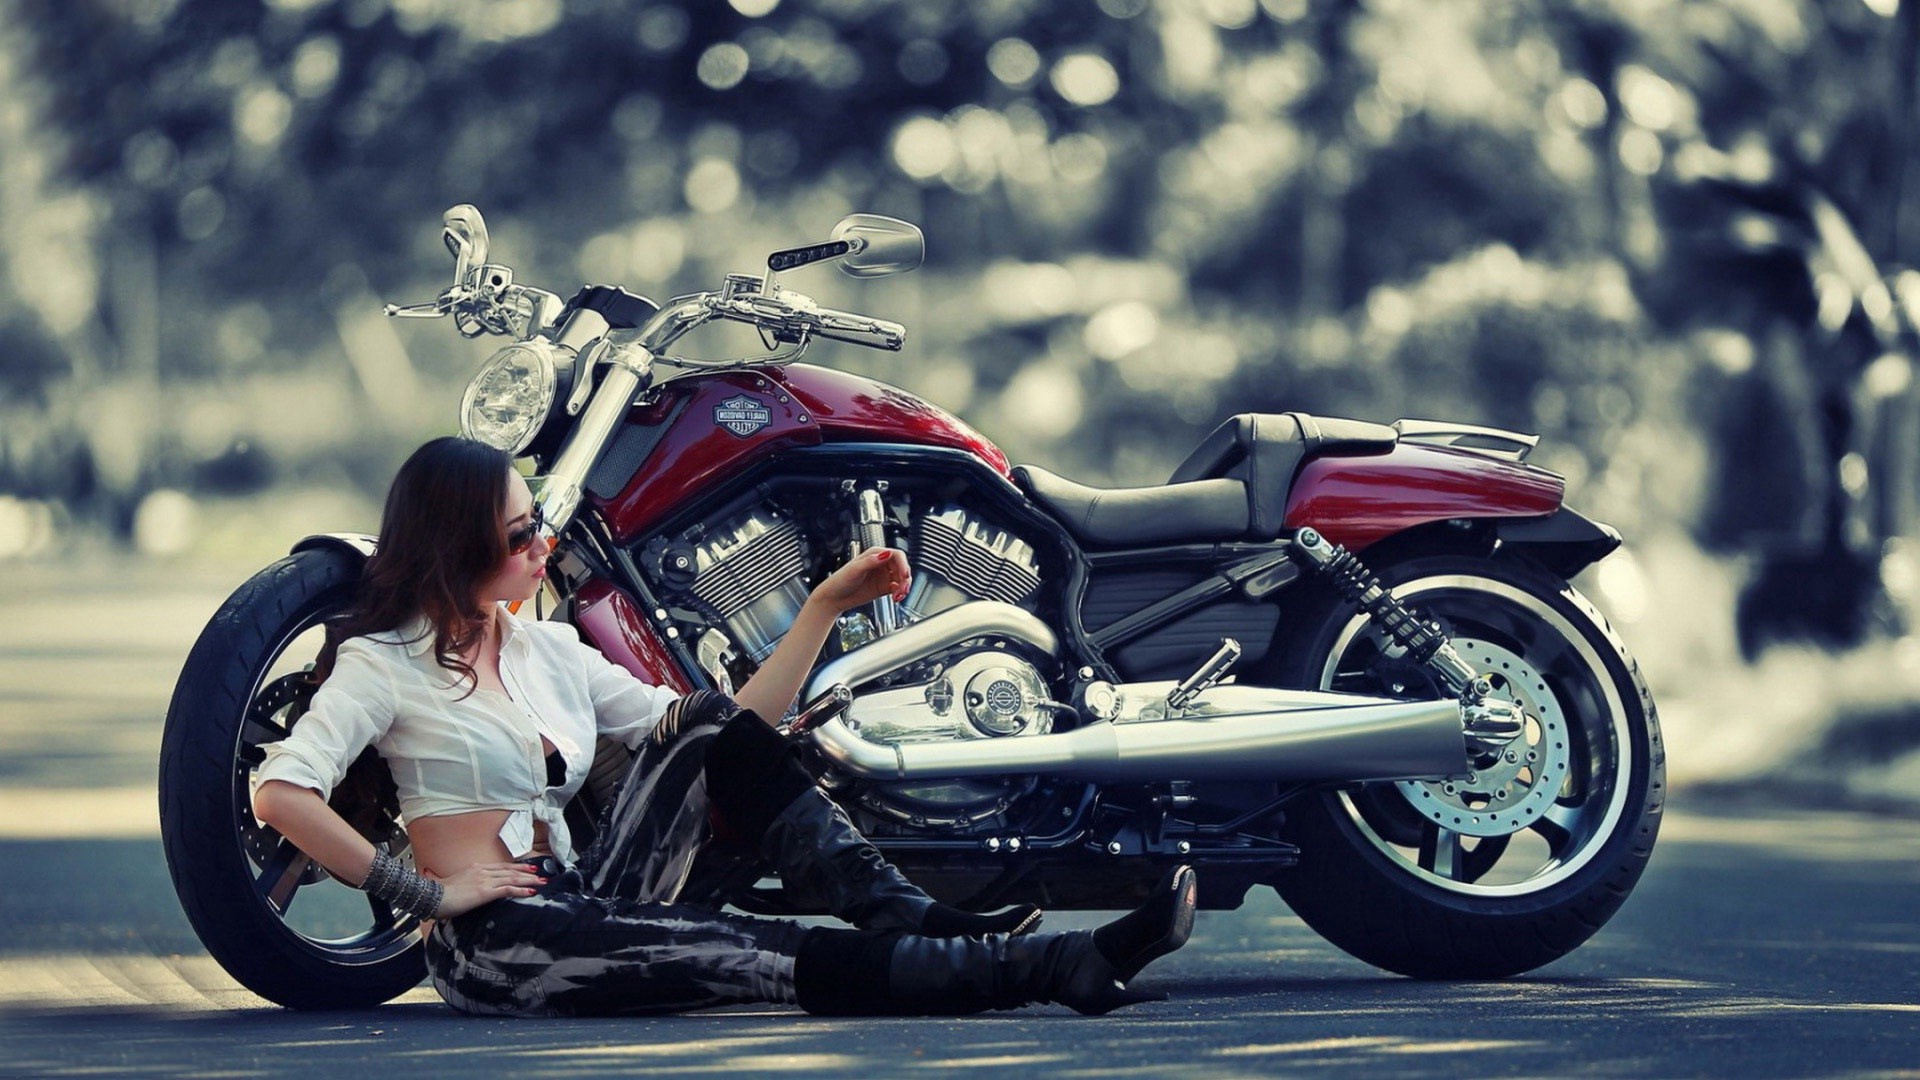 1920x1080 Luxurious bike with hot girl tremendous wallpapers